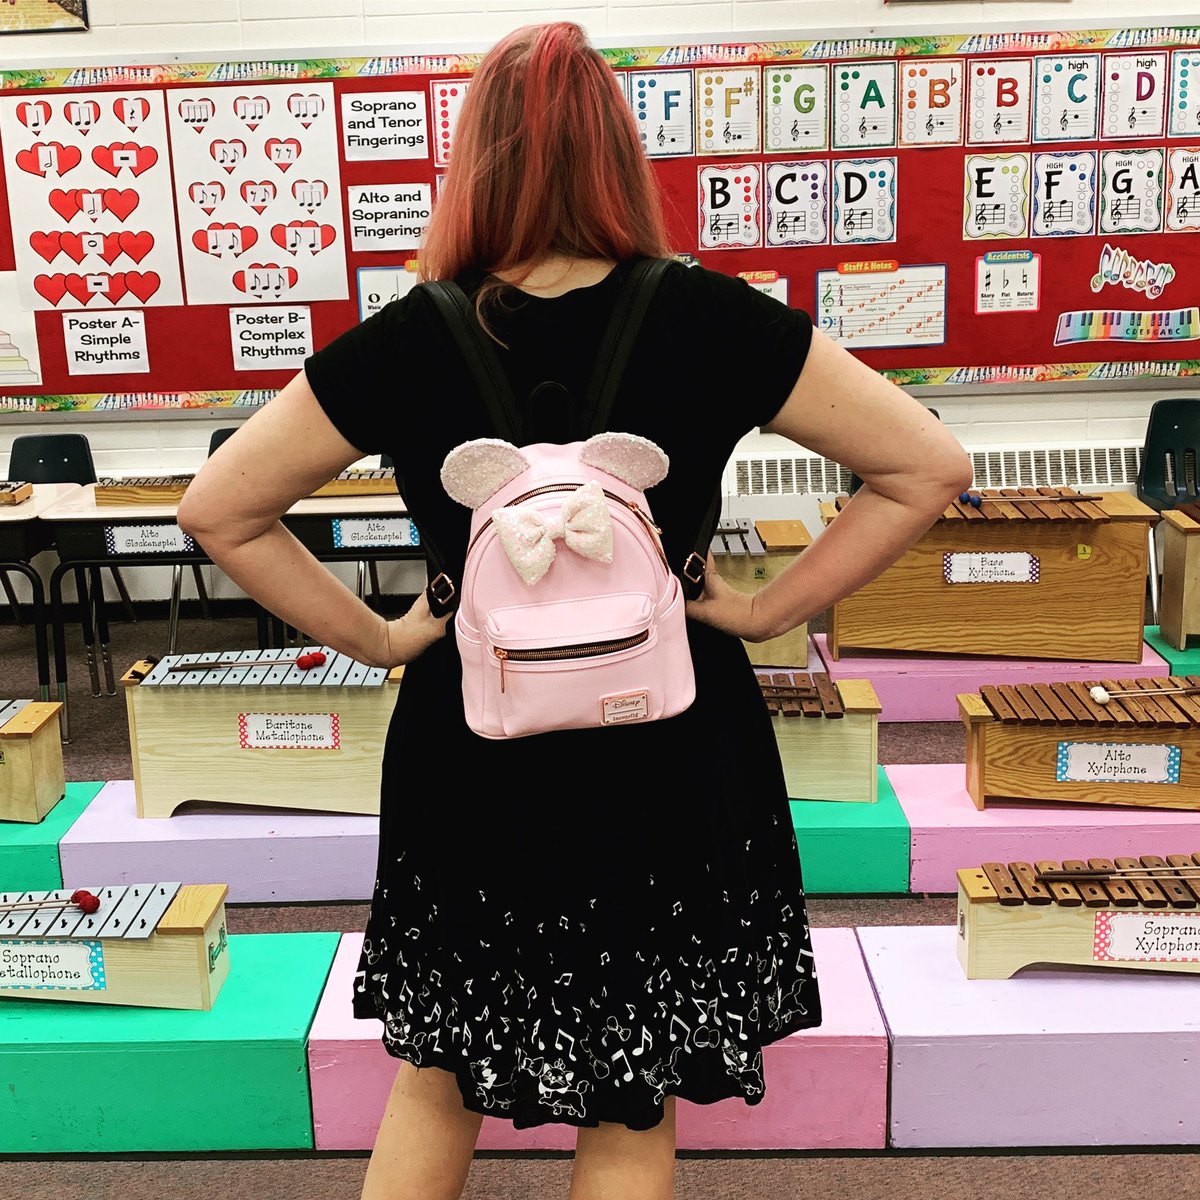 Ready for school in my #minniemouse #loungeflyminibackpack #iteachmusic #eips1stday